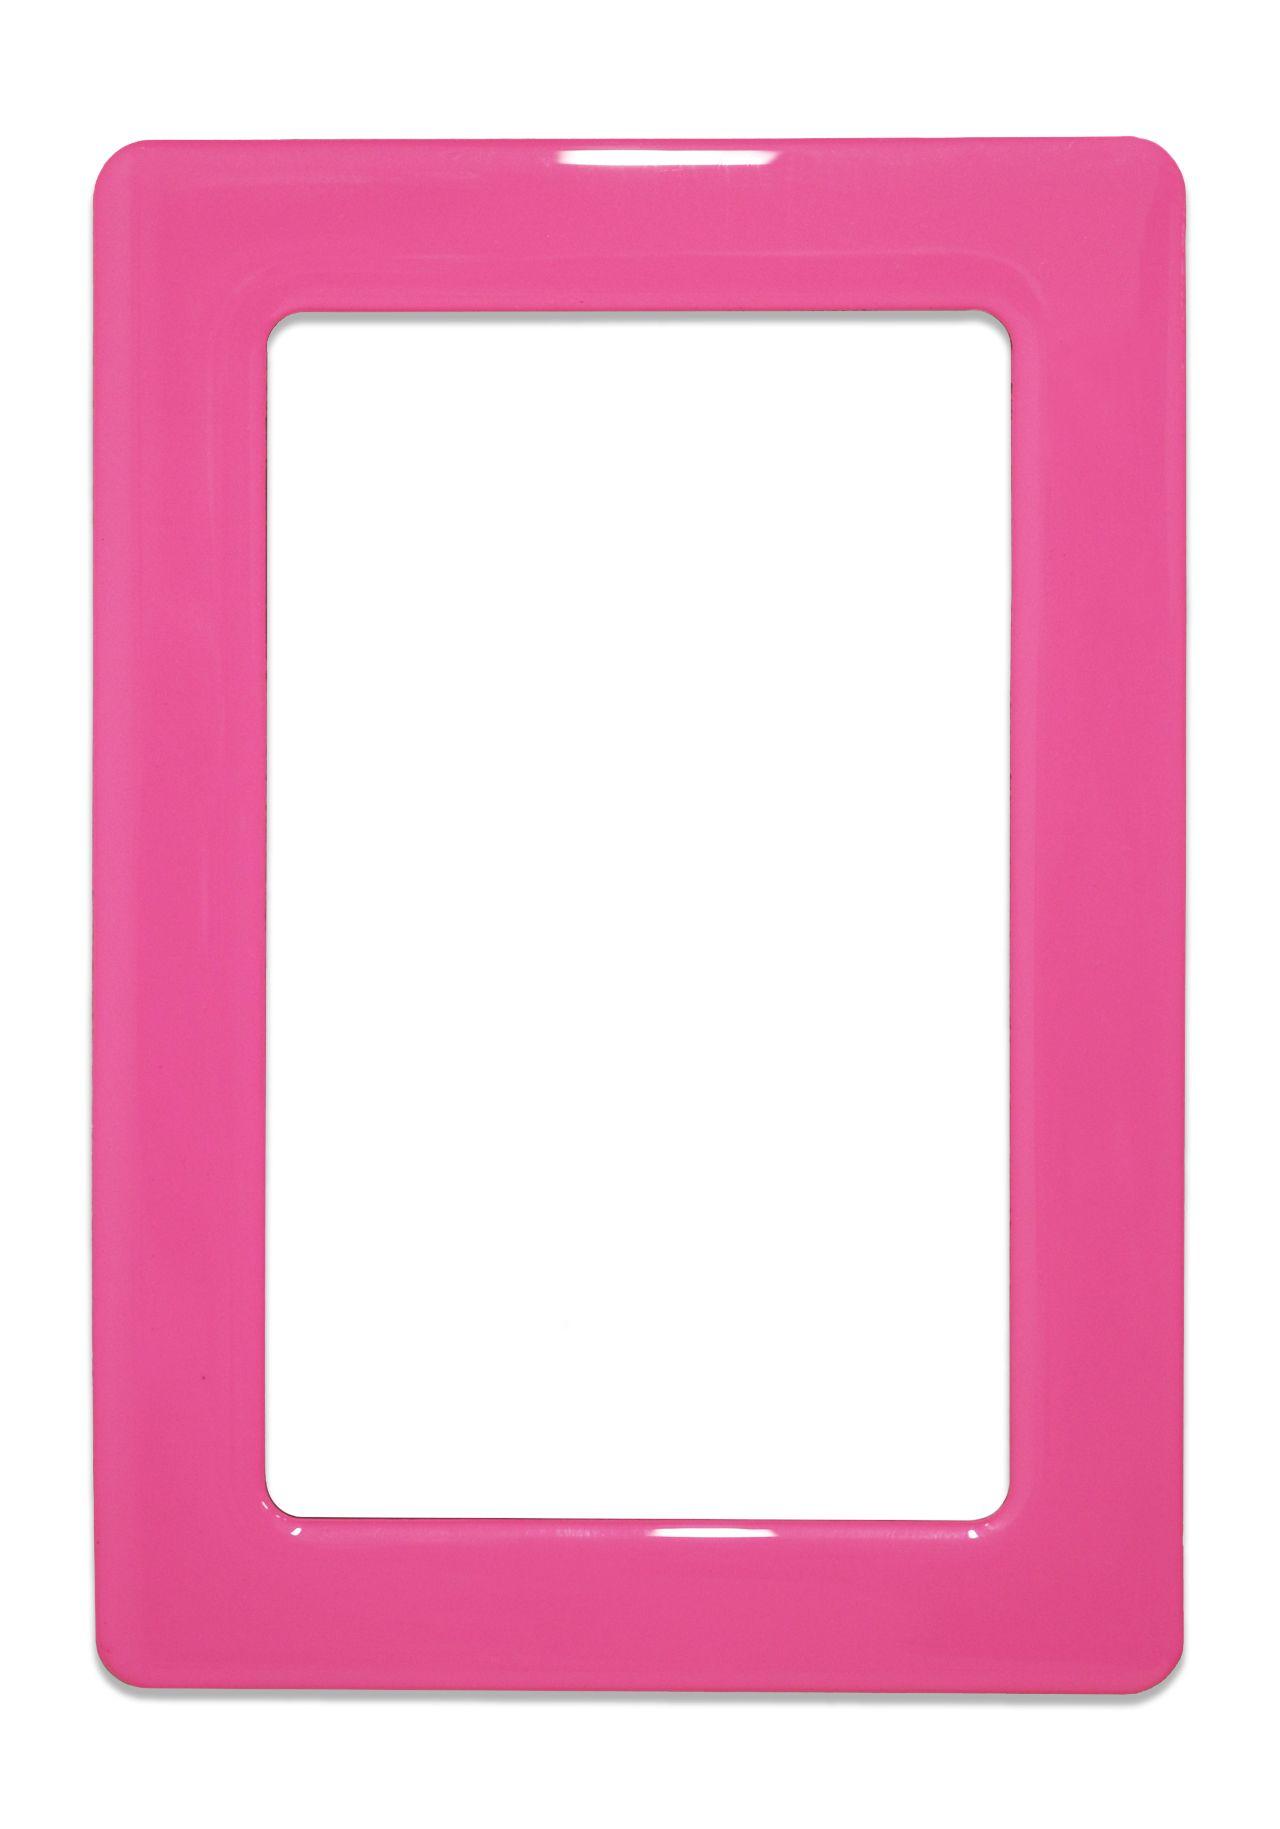 Magnetic self-adhesive frame size 12.3x8.1cm - pink